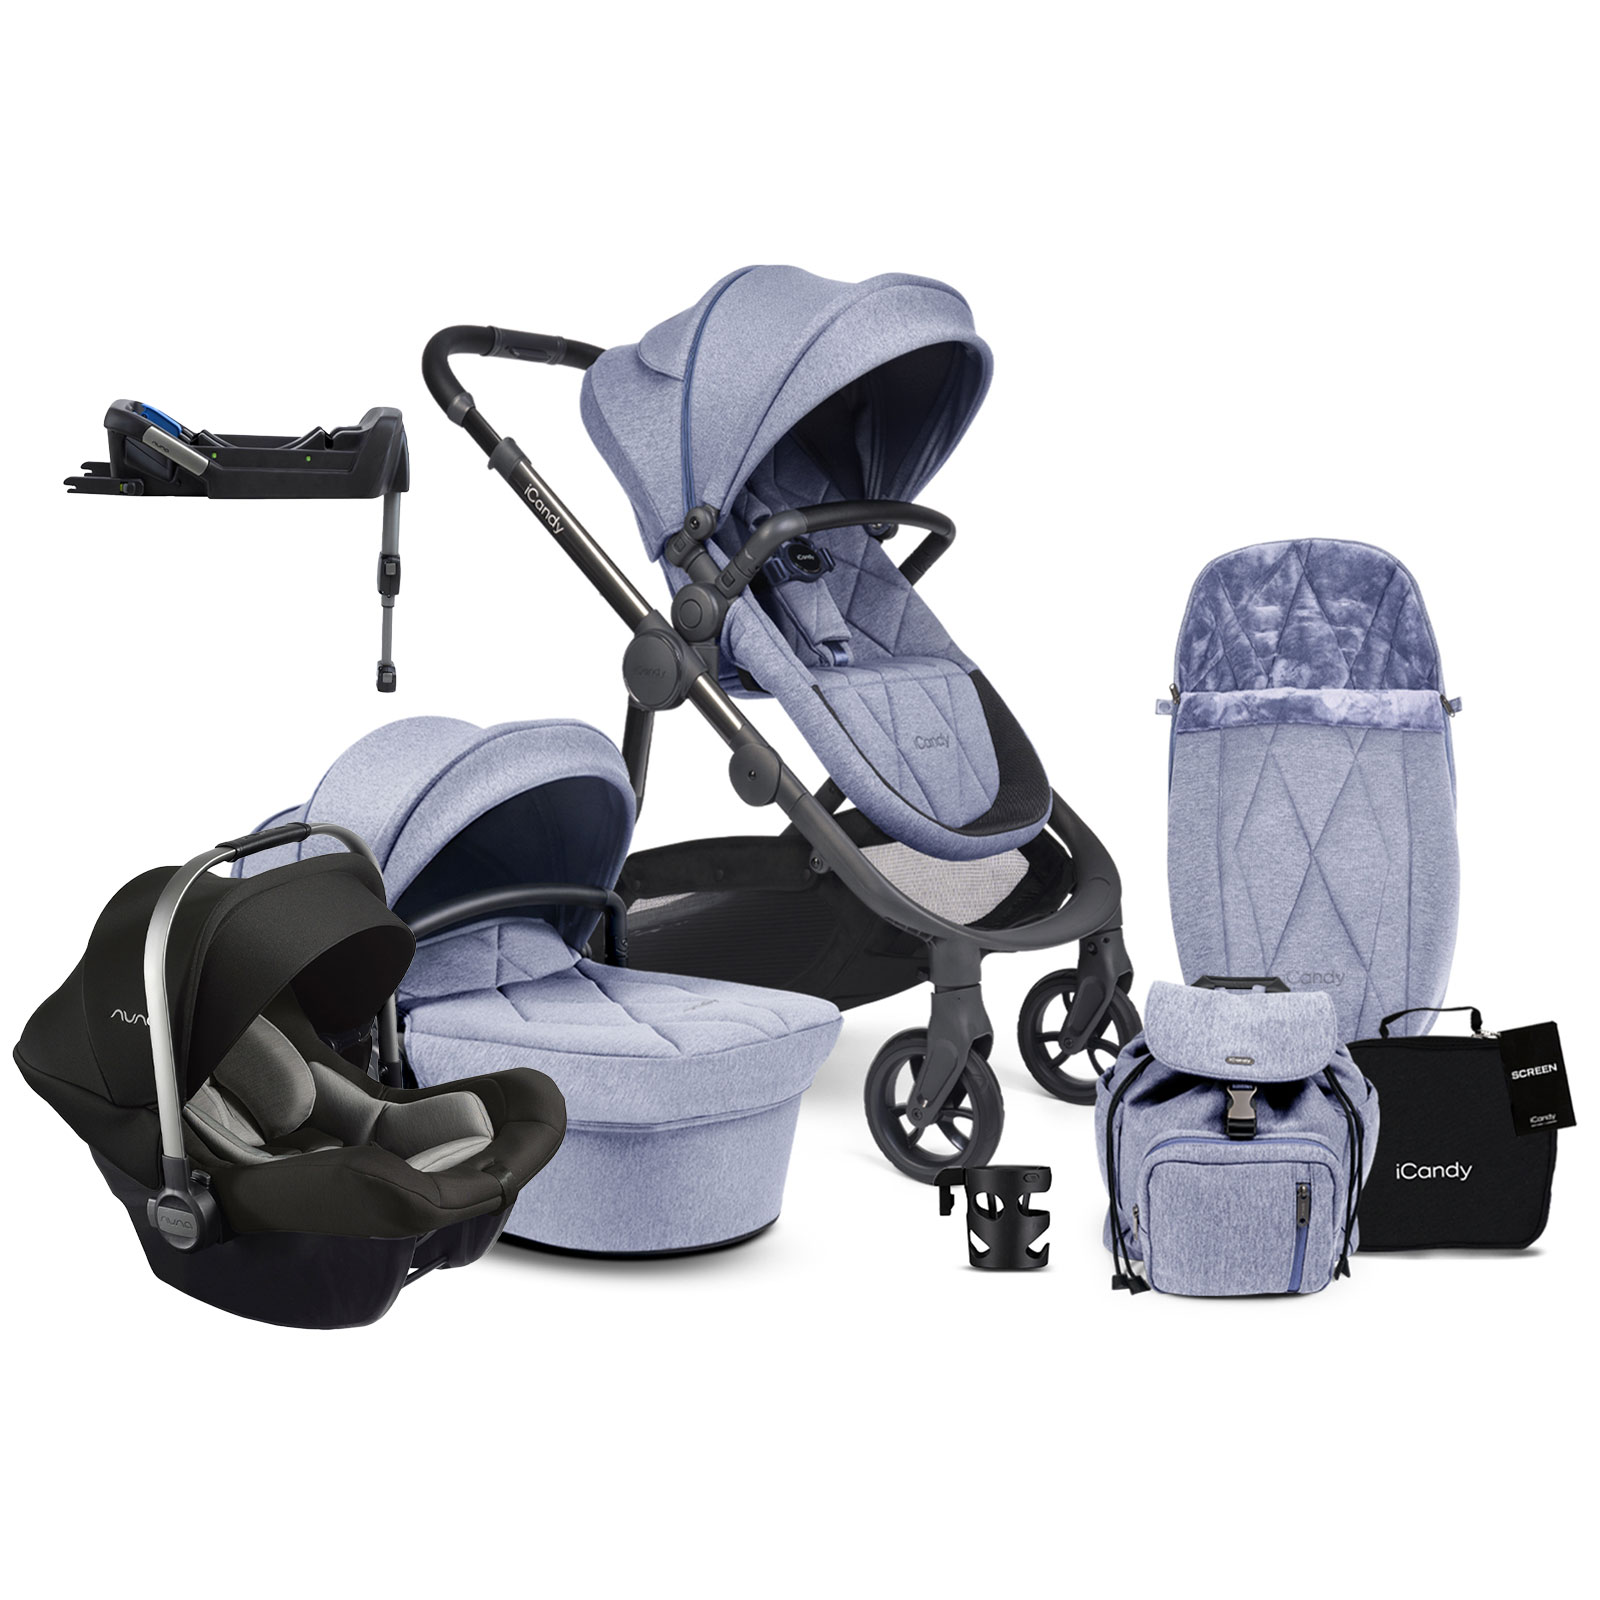 iCandy Orange 3 Carrycot & Pushchair Complete Bundle with Pipa Lite LX Car Seat - Mist Blue